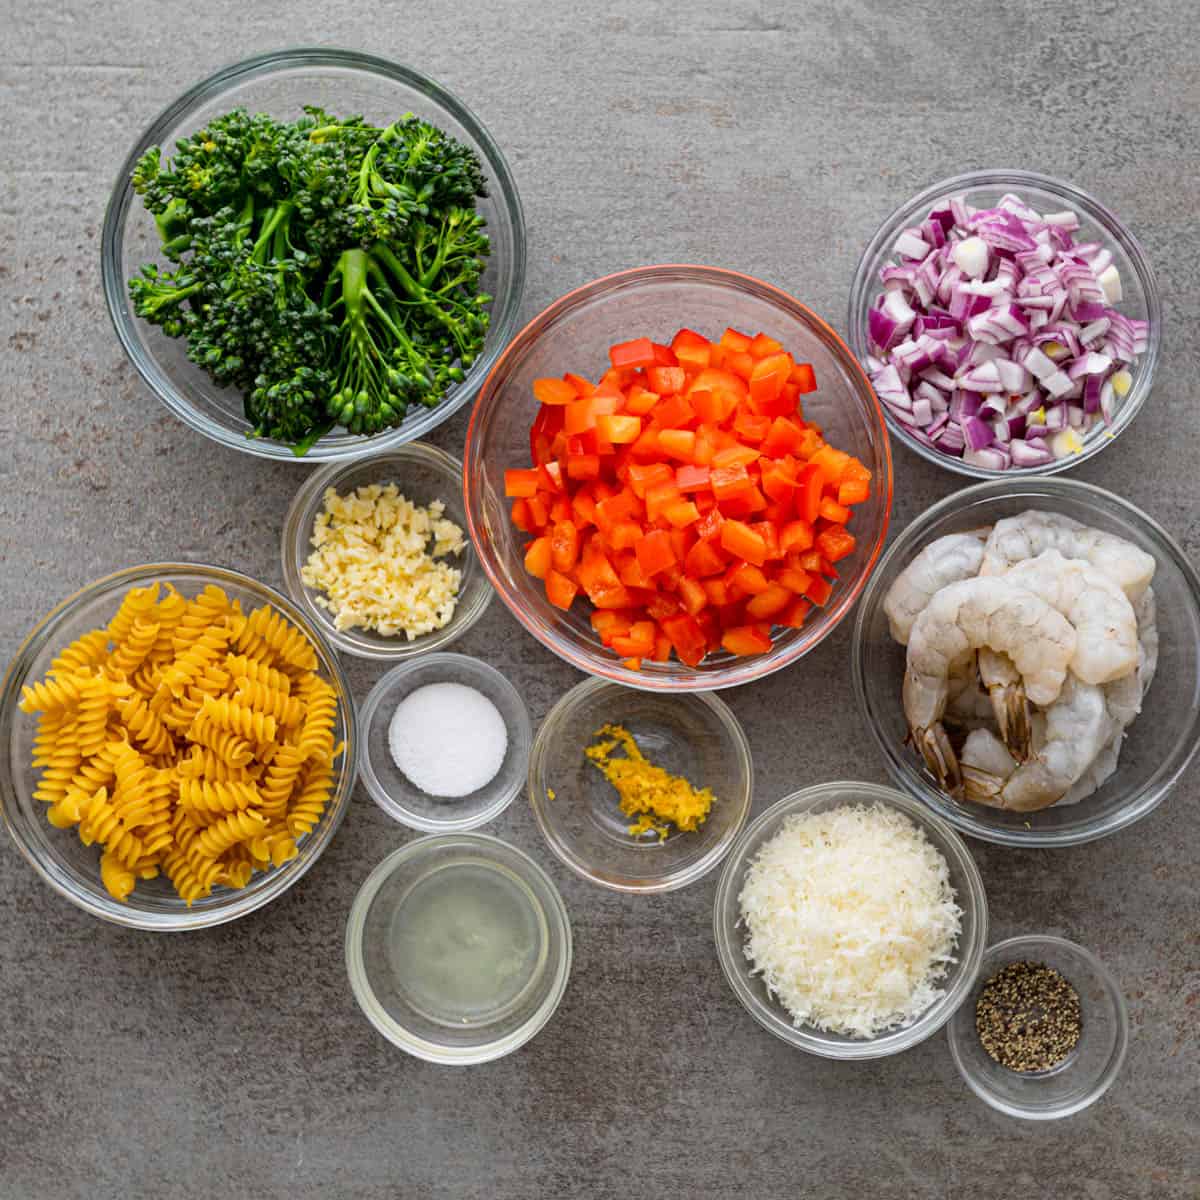 the ingredients from rotini pasta.